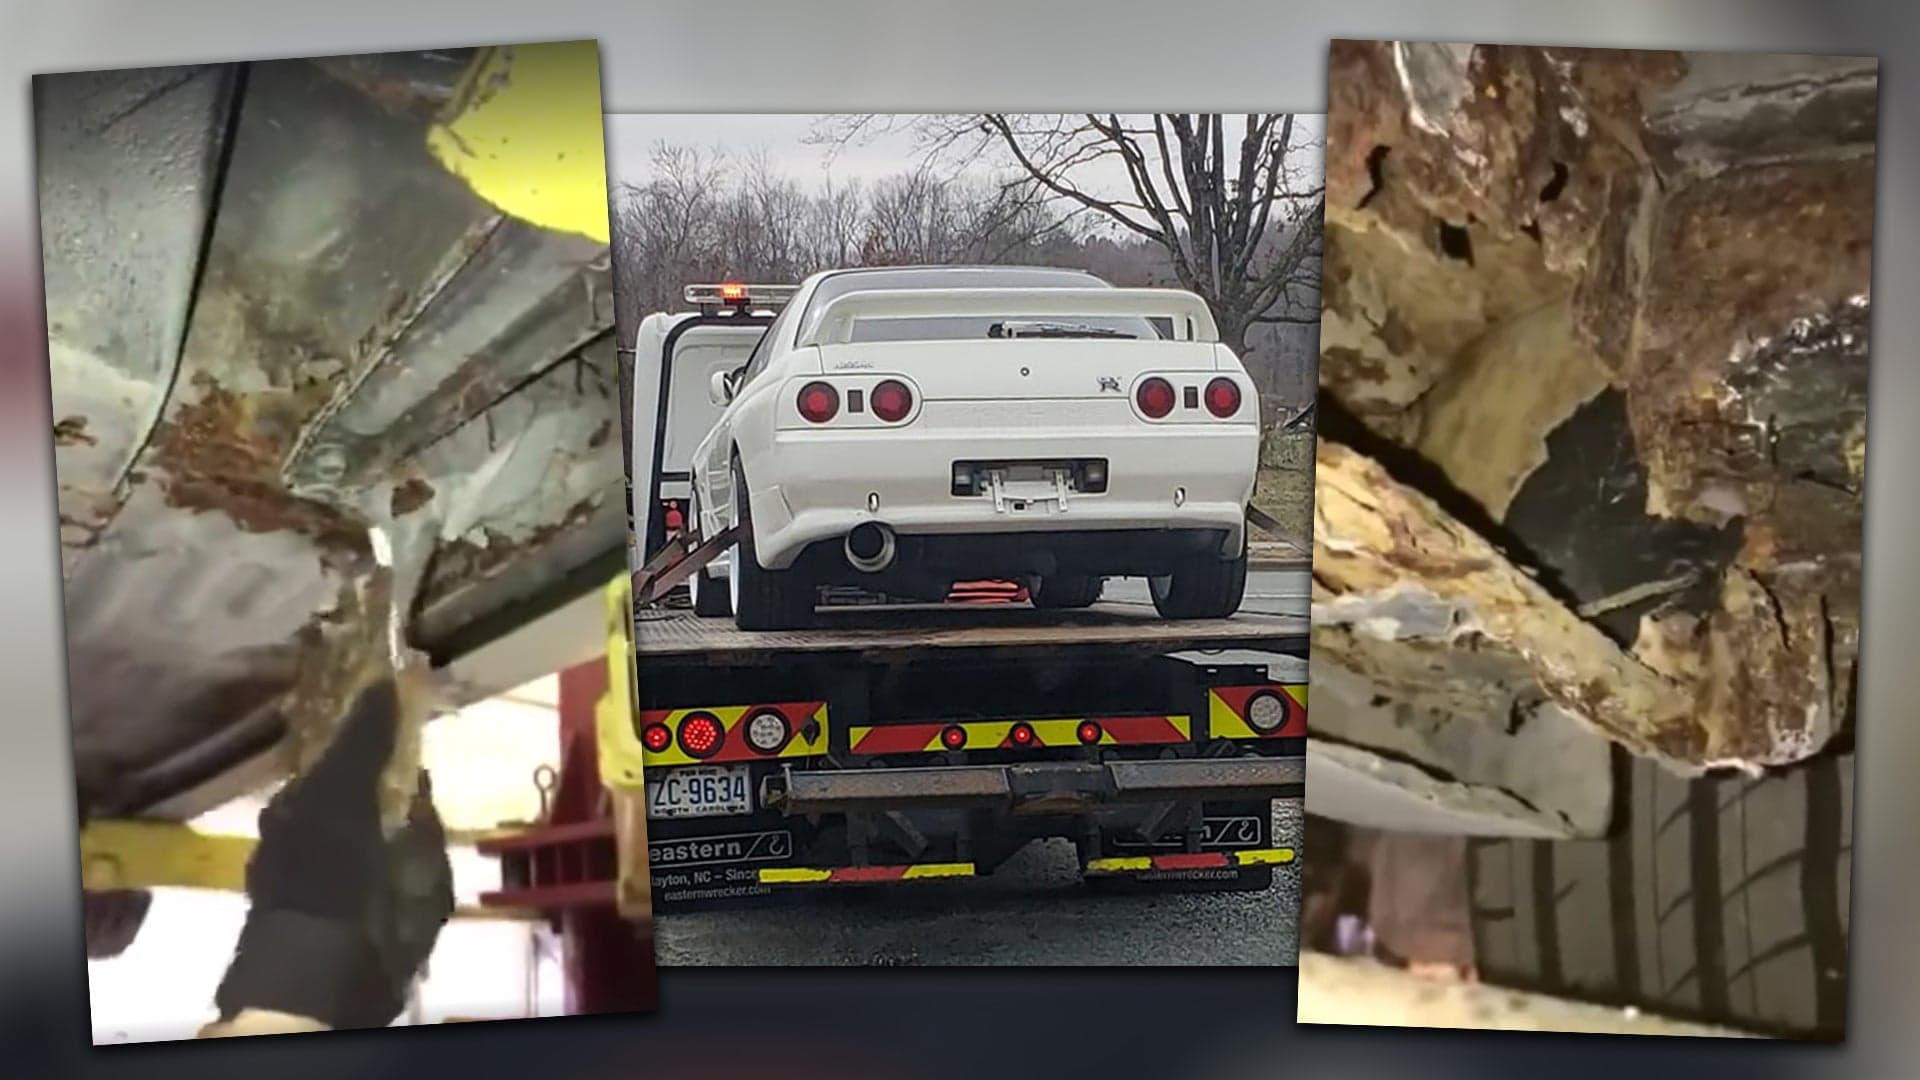 There’s an Incredibly Messy Fight Behind This Viral Video of a Rusted-Out R32 Skyline GT-R